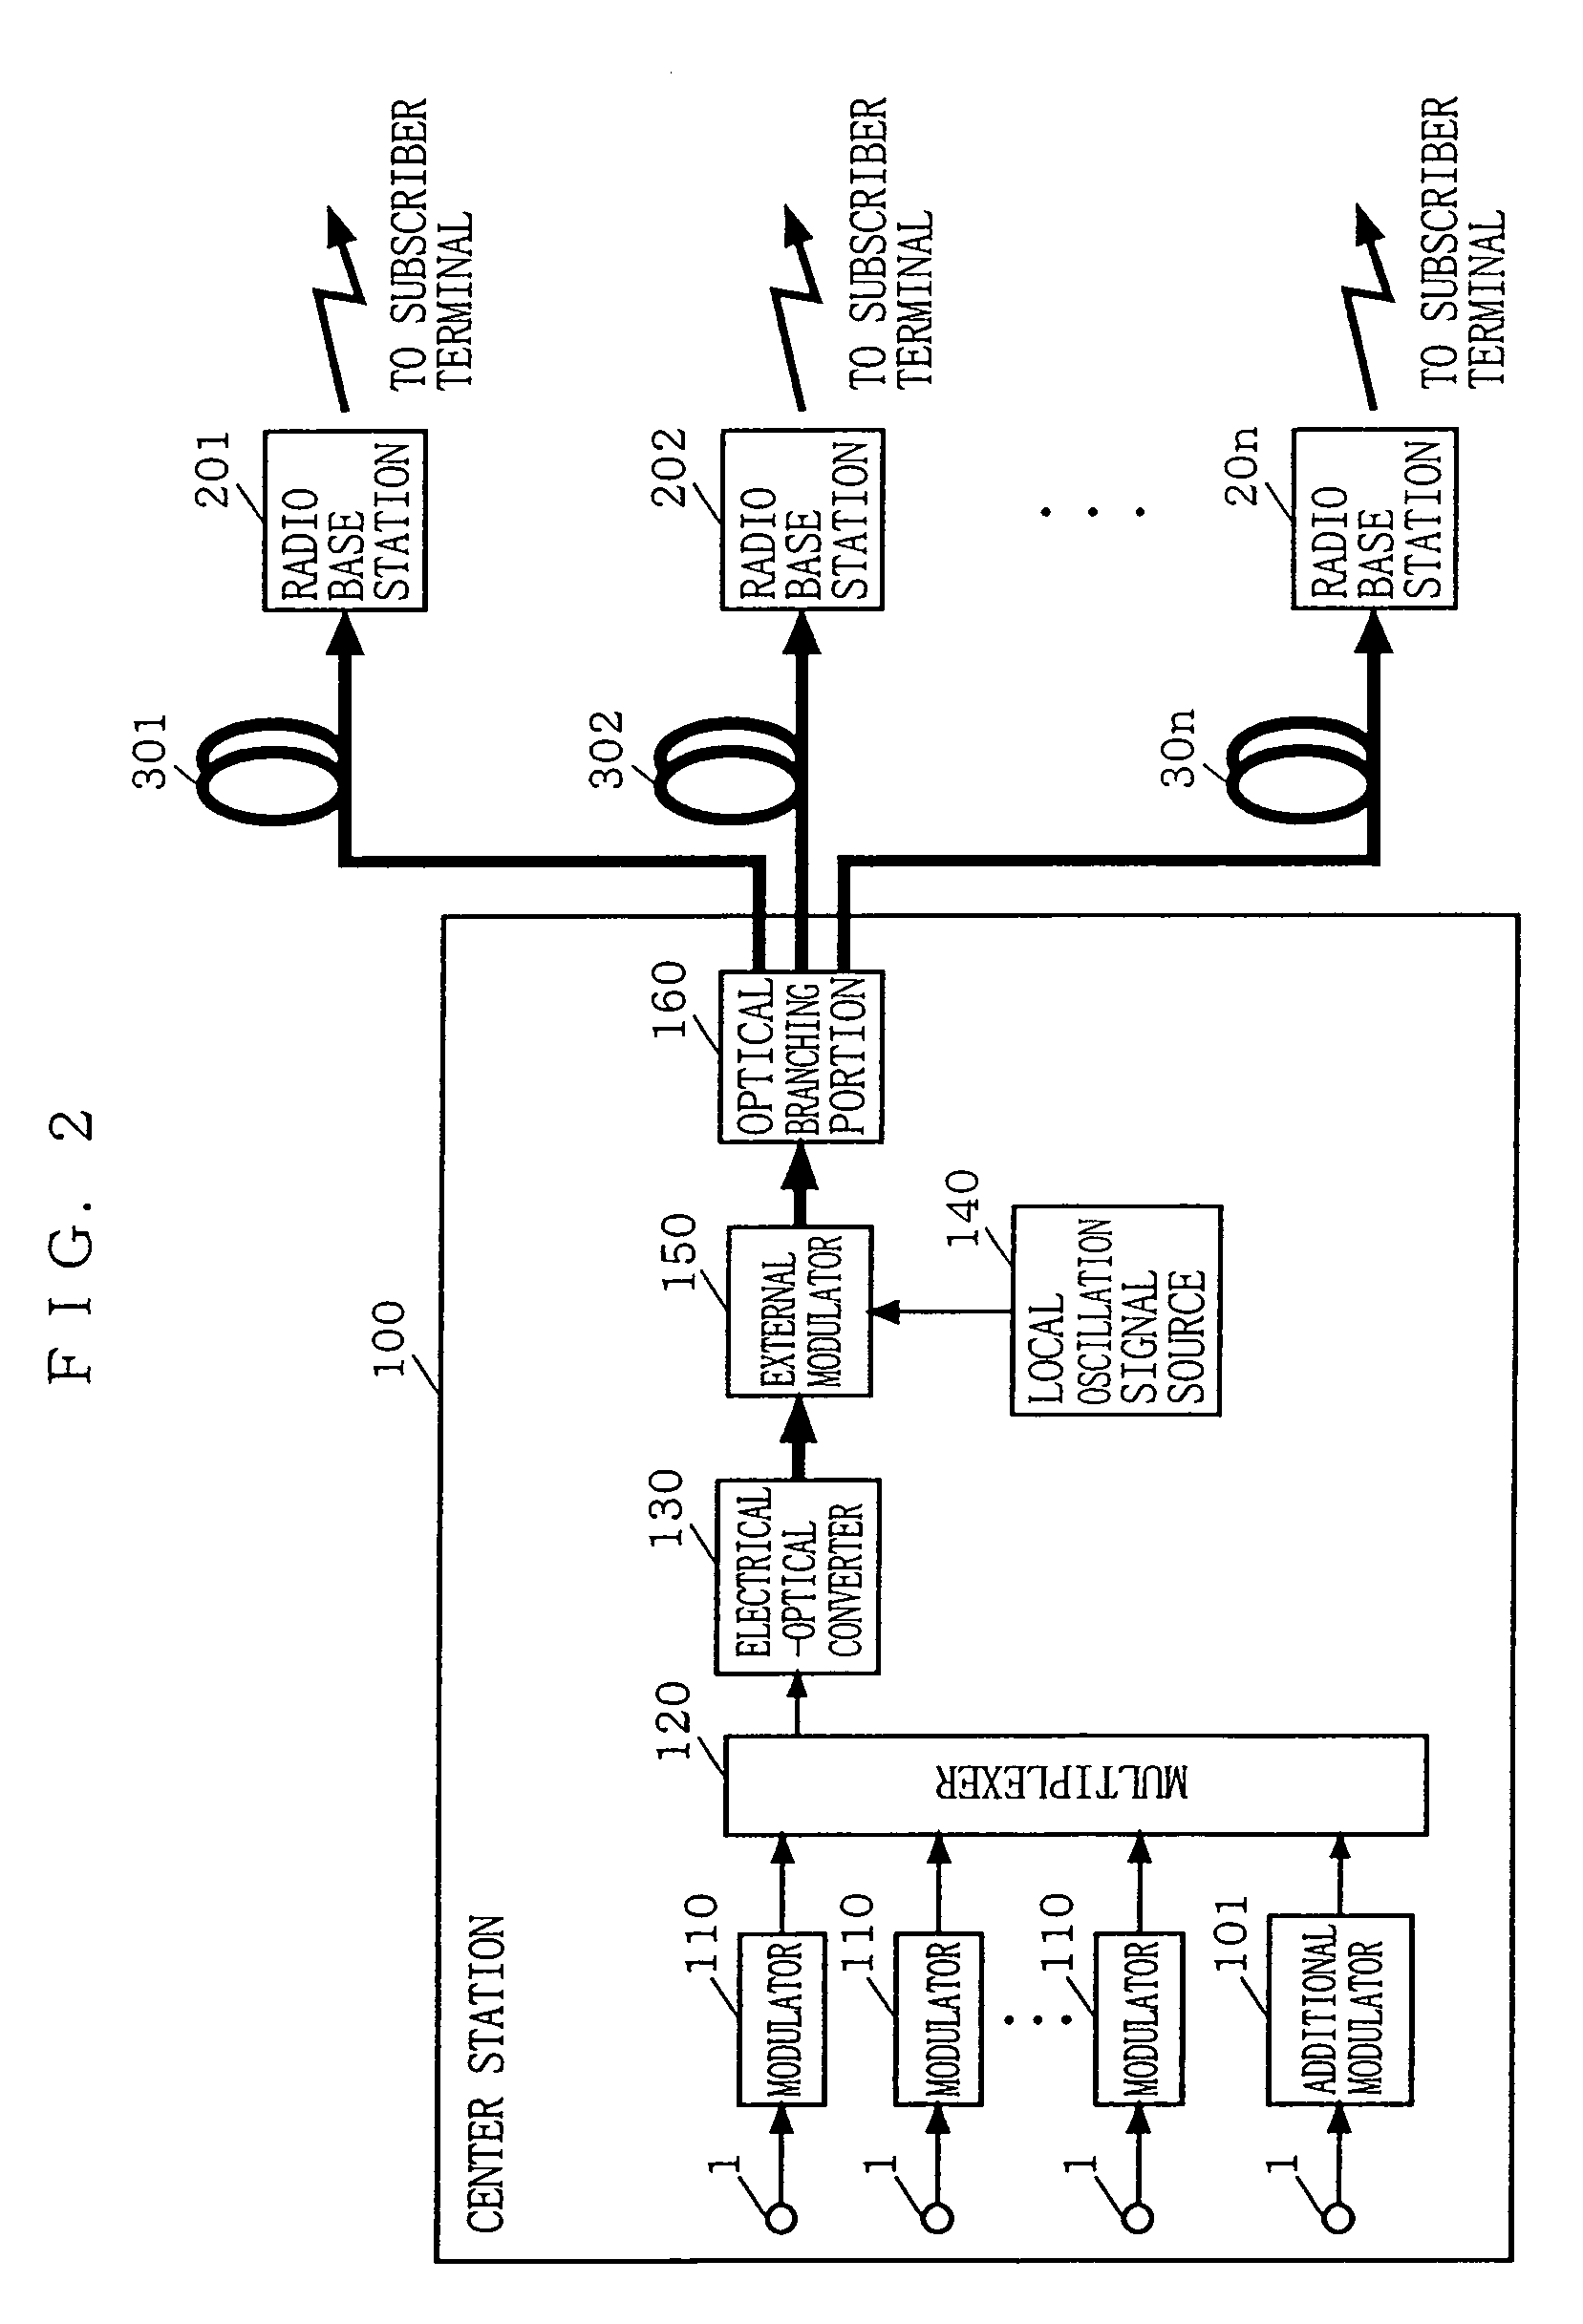 Optical transmission system for radio access and high frequency optical transmitter